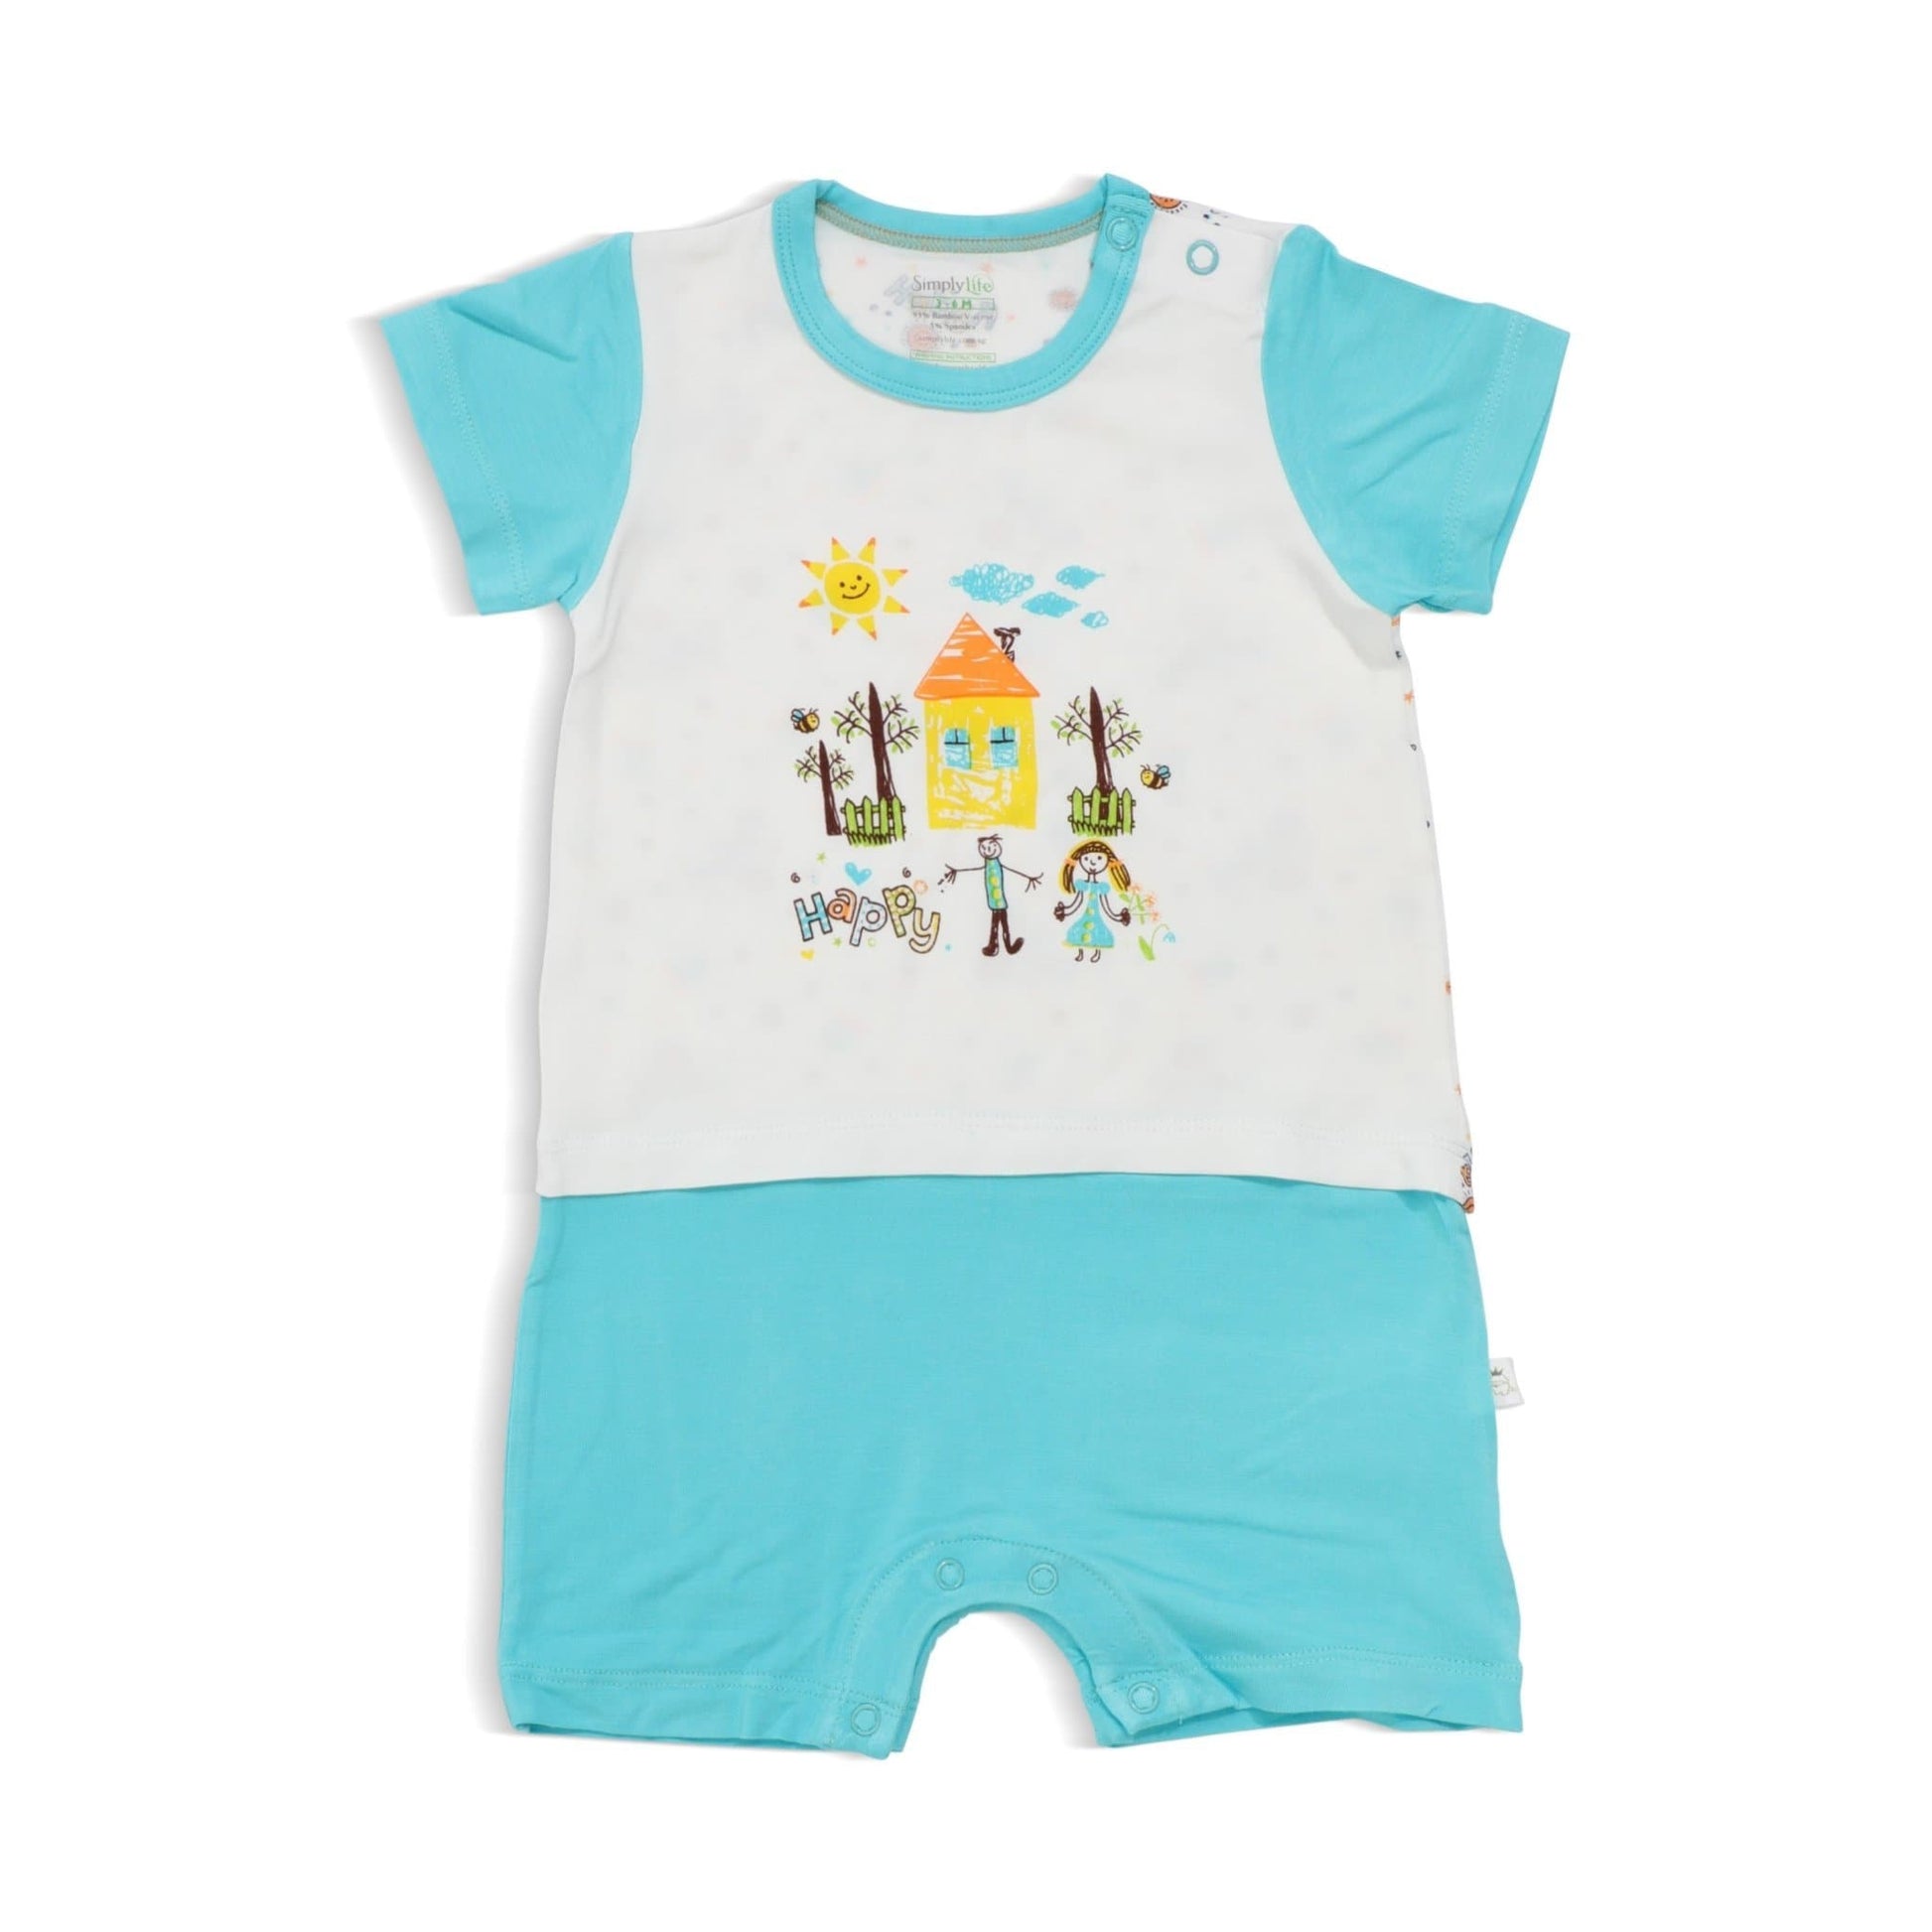 Happy - Tee (shoulder button) with attached Shorts by simplylifebaby